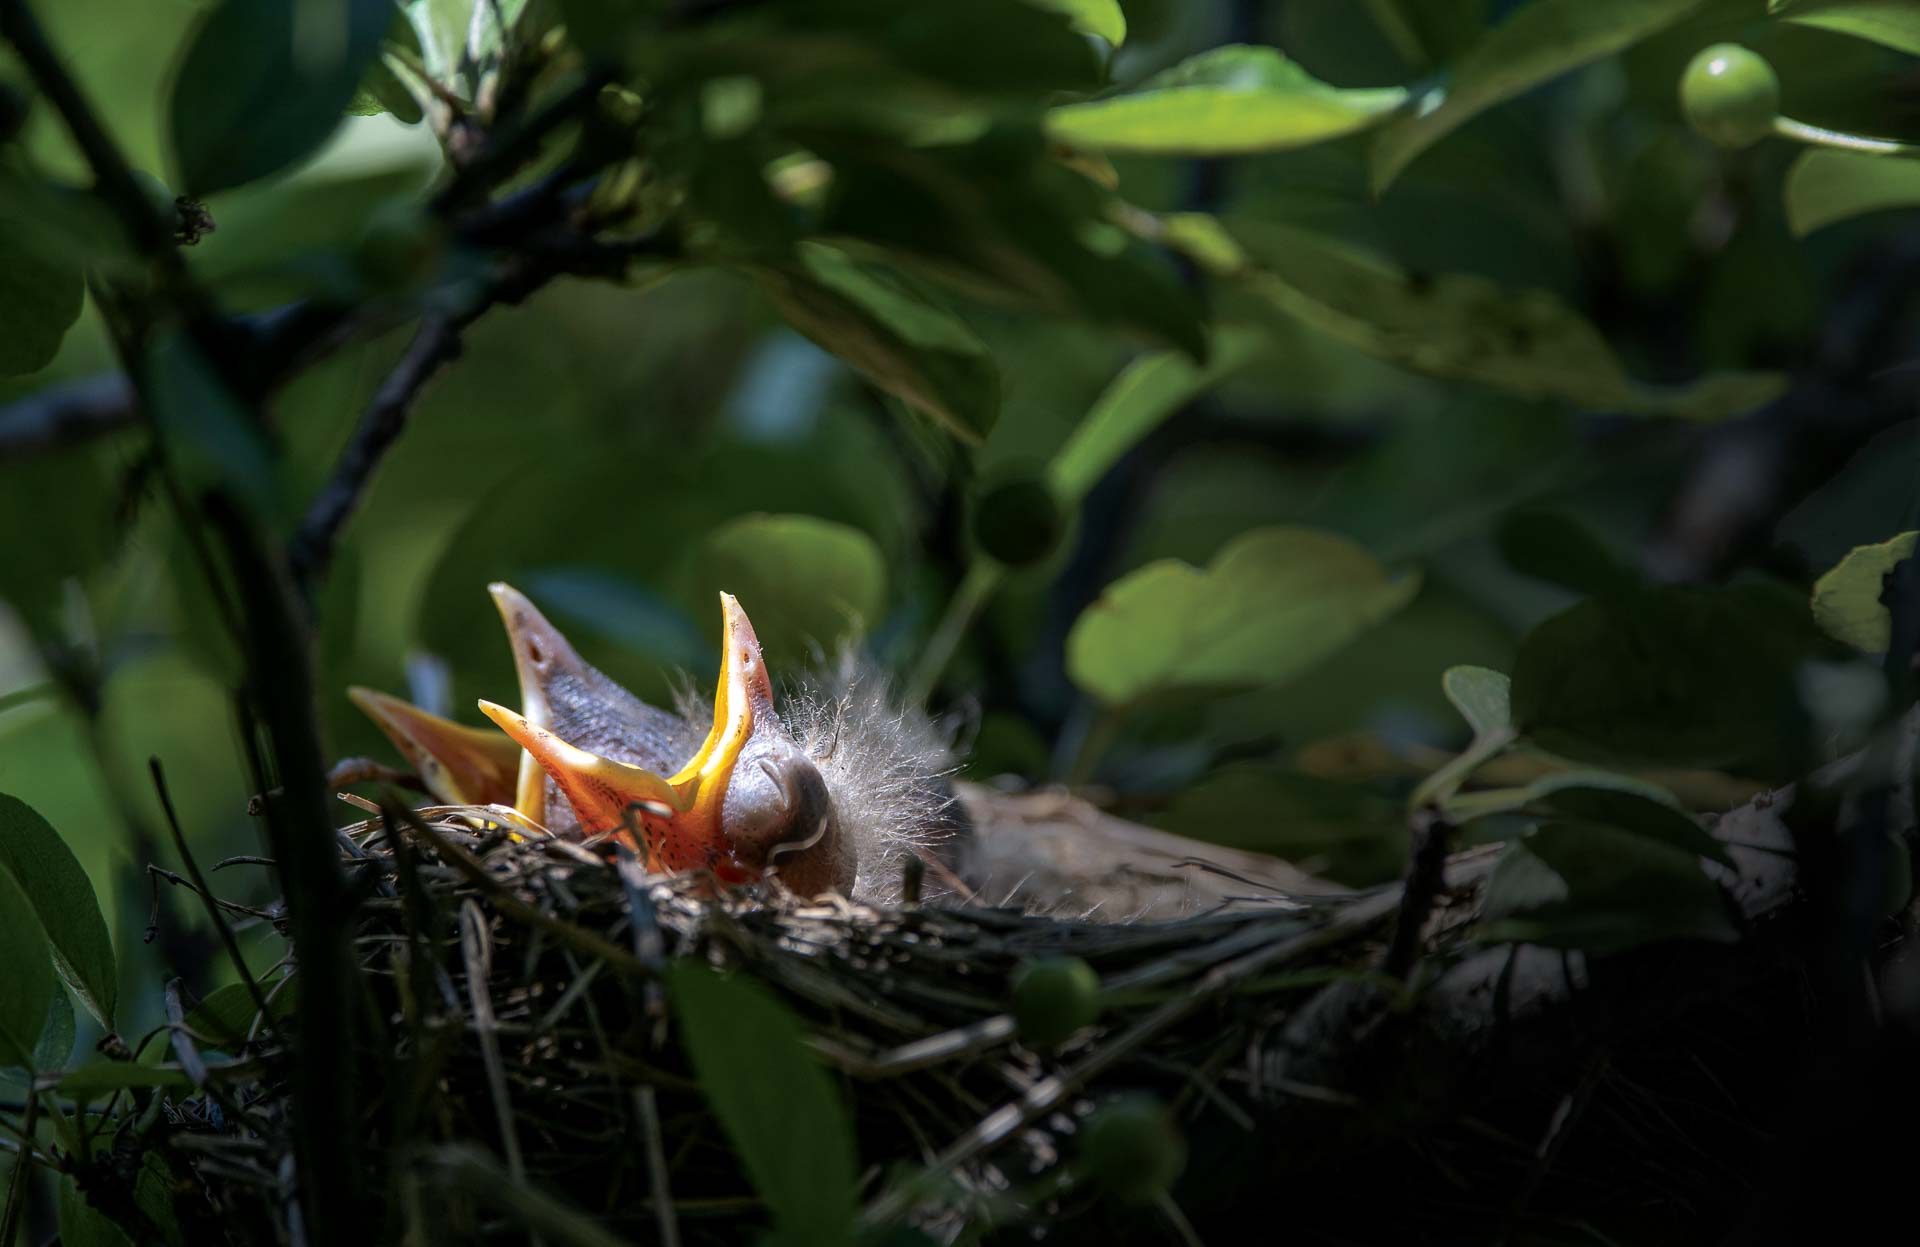 Young birds in a nest stretch out and open their beaks wide to recieve food.